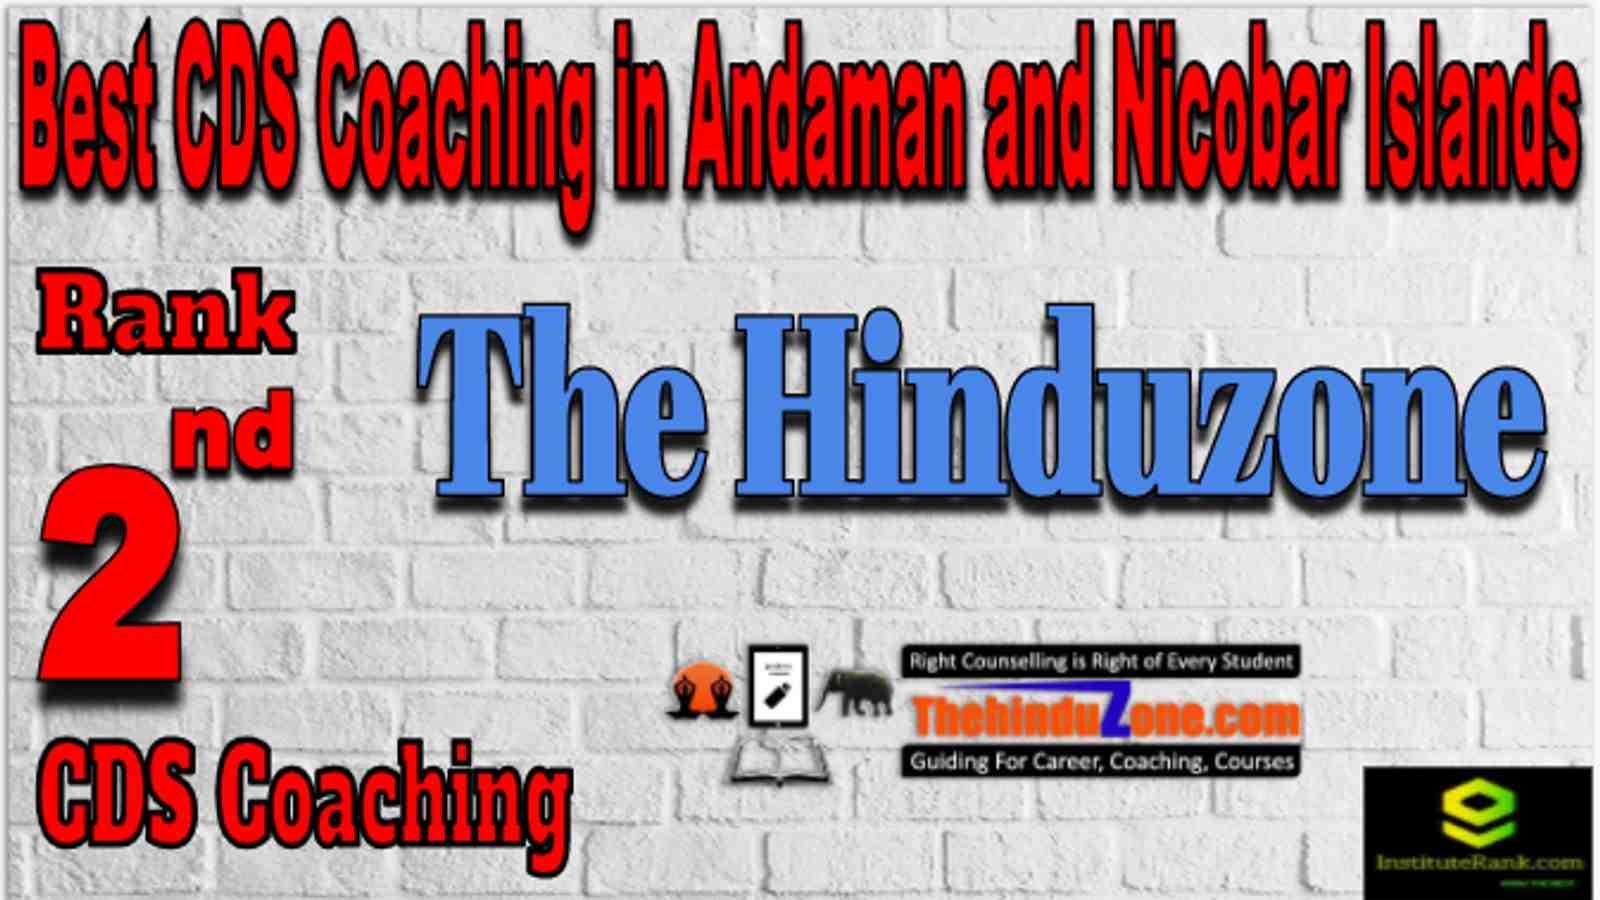 Rank 2 Best CDS Coaching in Andaman and Nicobar islands